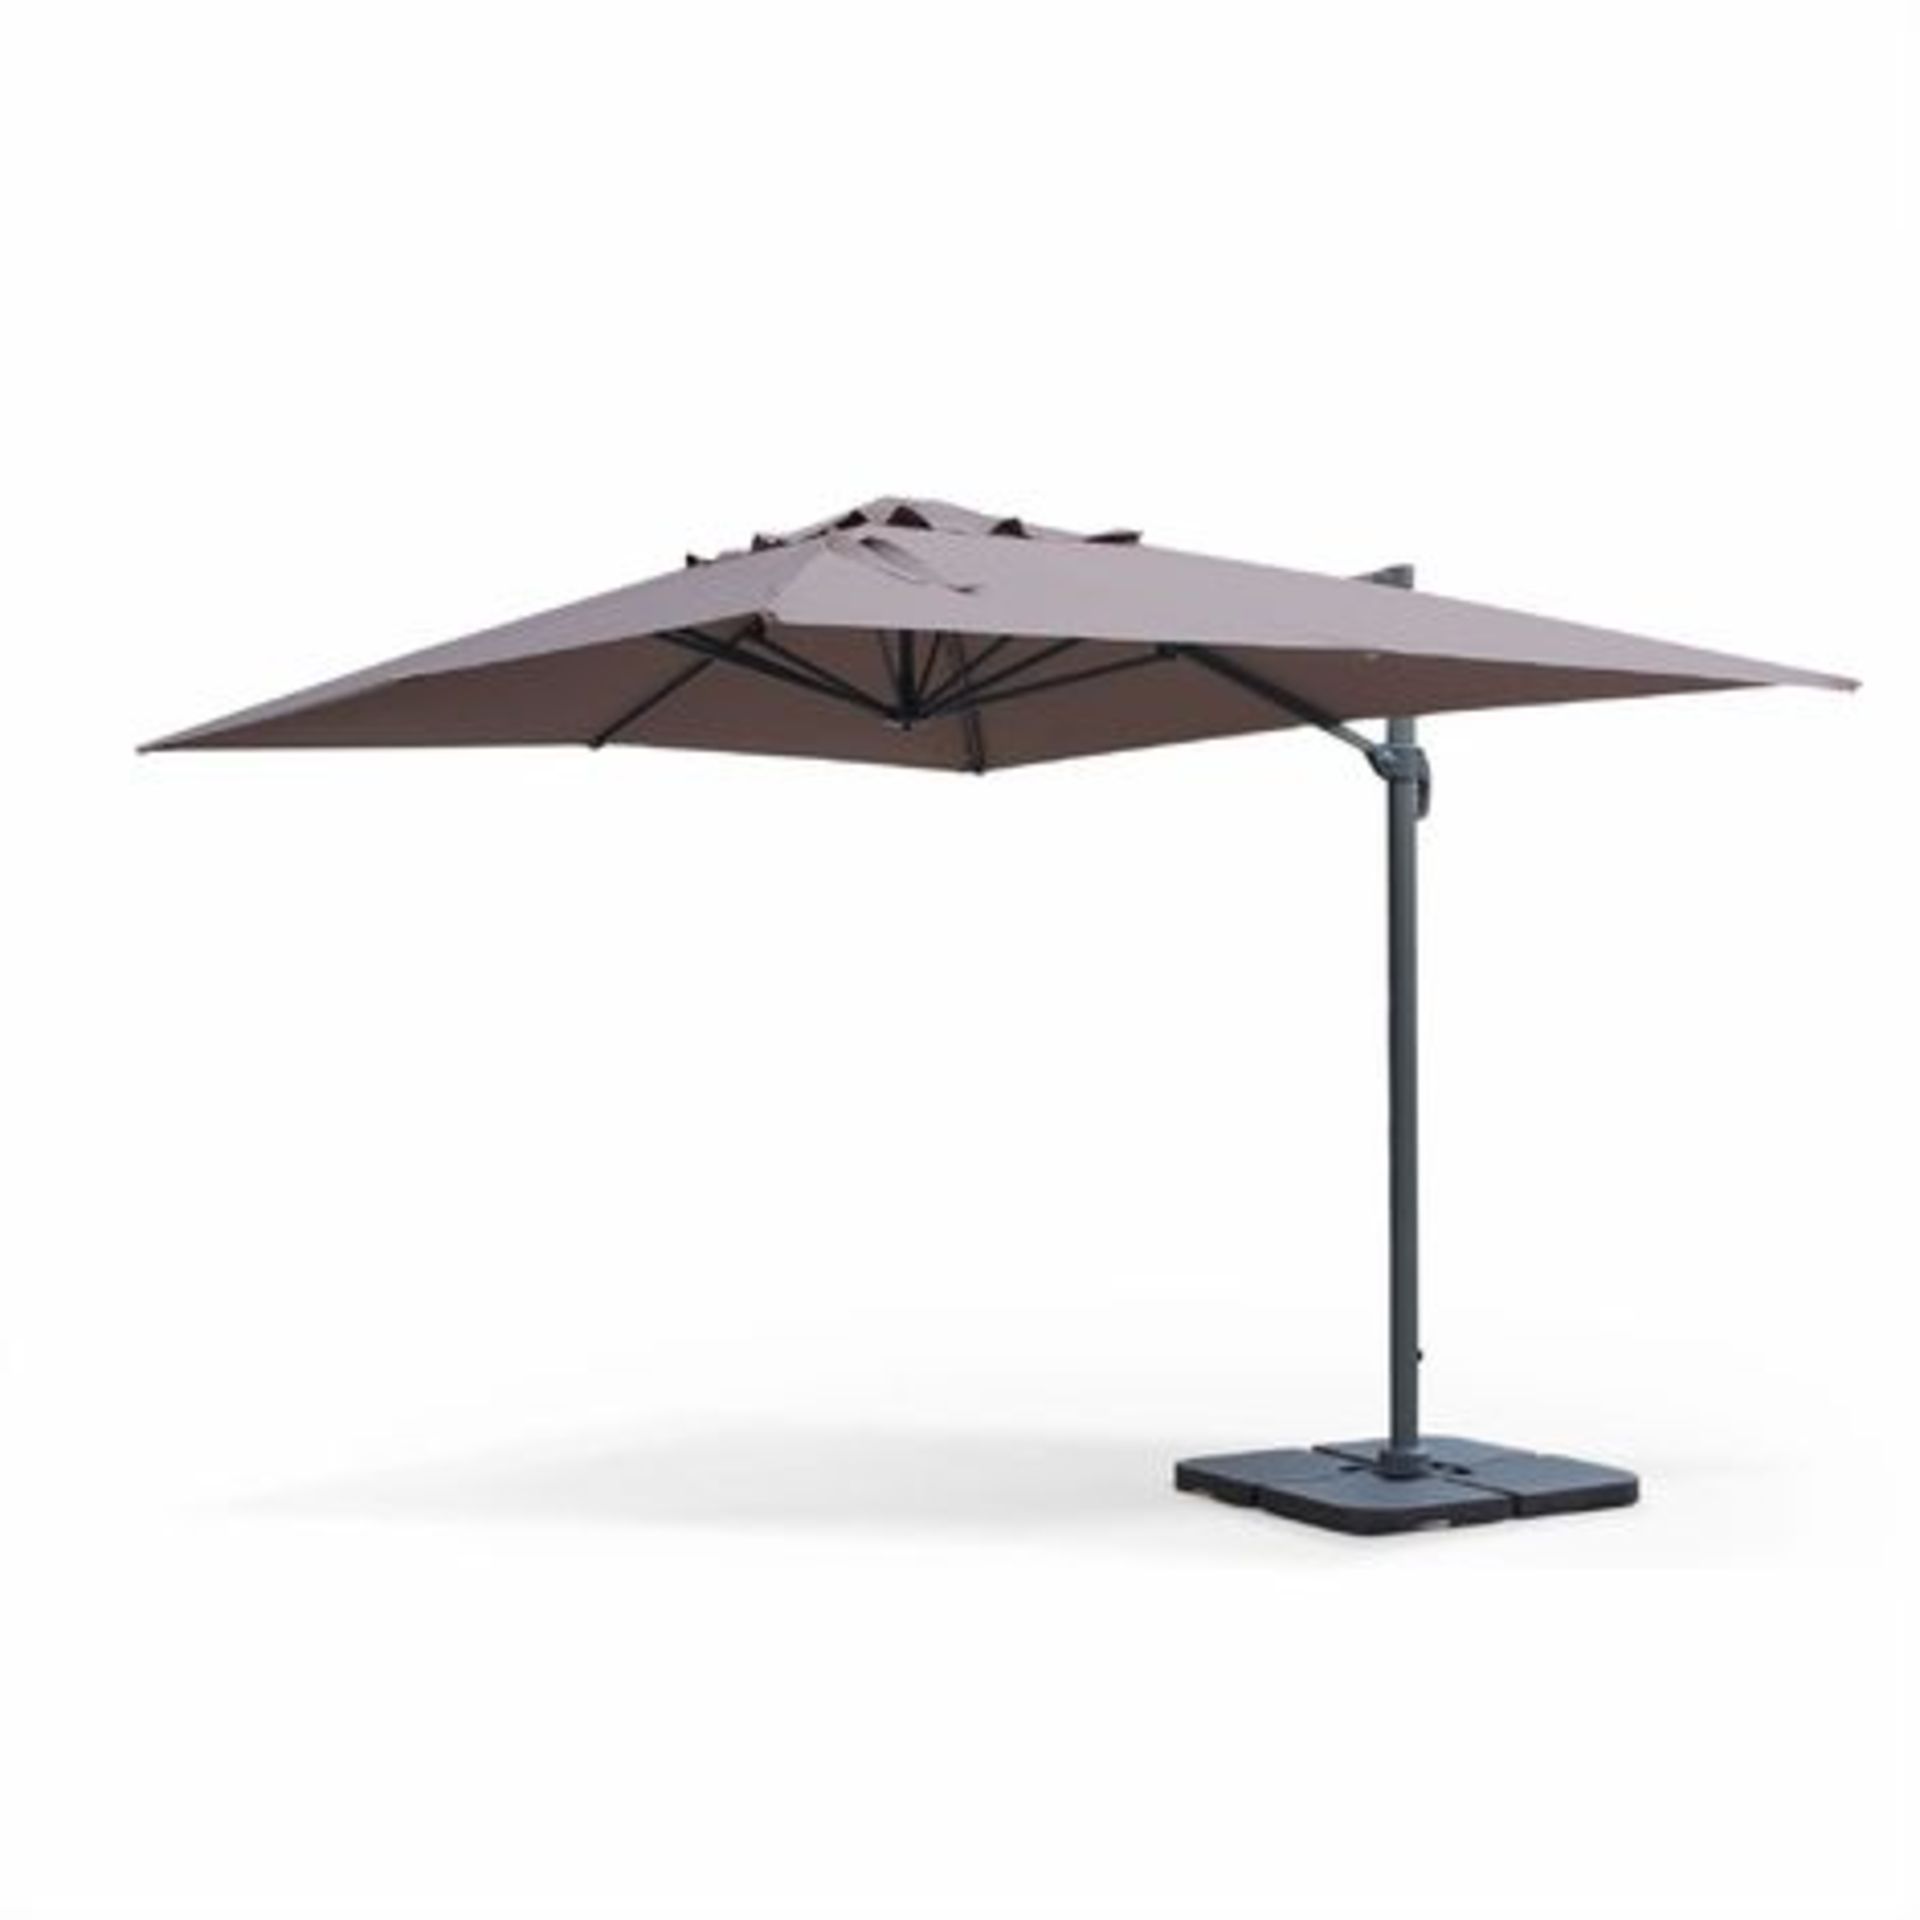 V Brand New 3m x 4m Saint Jean Cantilever Parasol Beige/Brown (Base Weights Not Included) Item